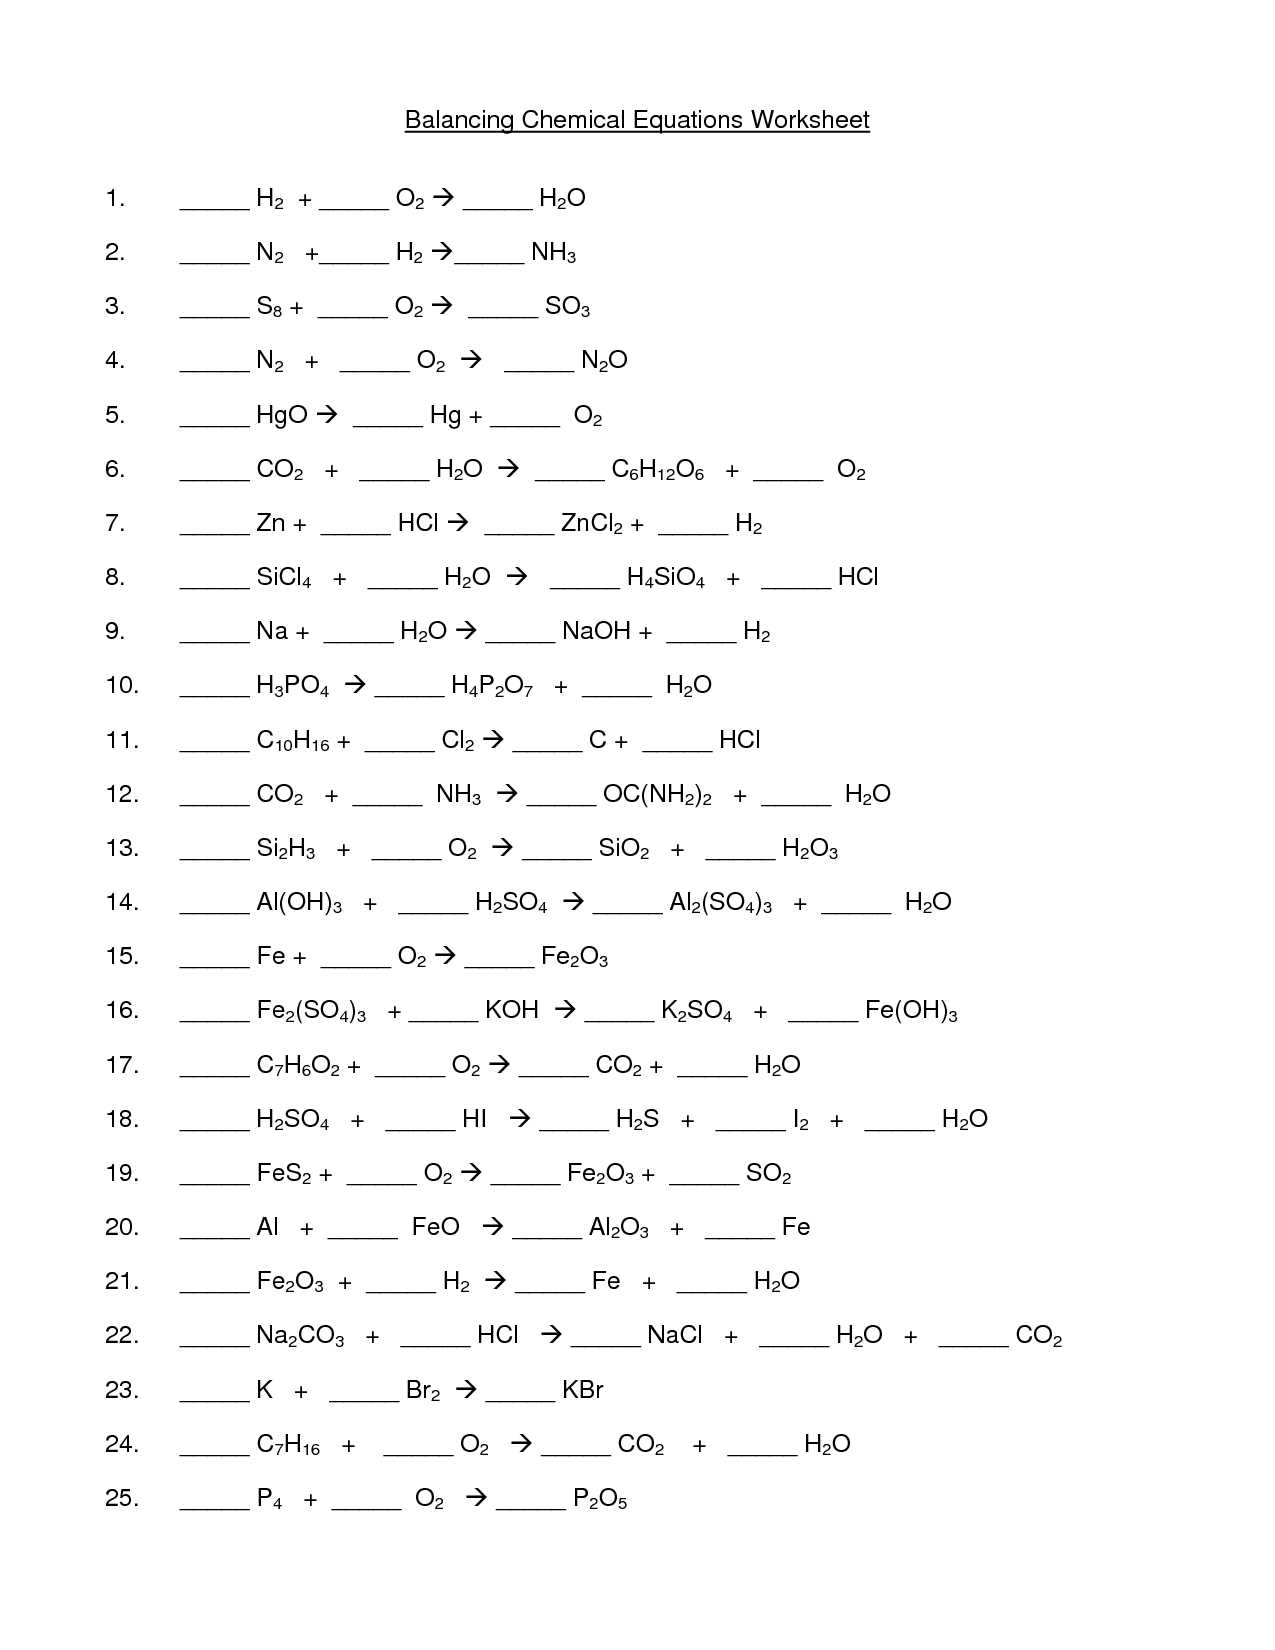 14-best-images-of-balancing-chemical-equations-worksheet-answer-key-1-15-balancing-chemical